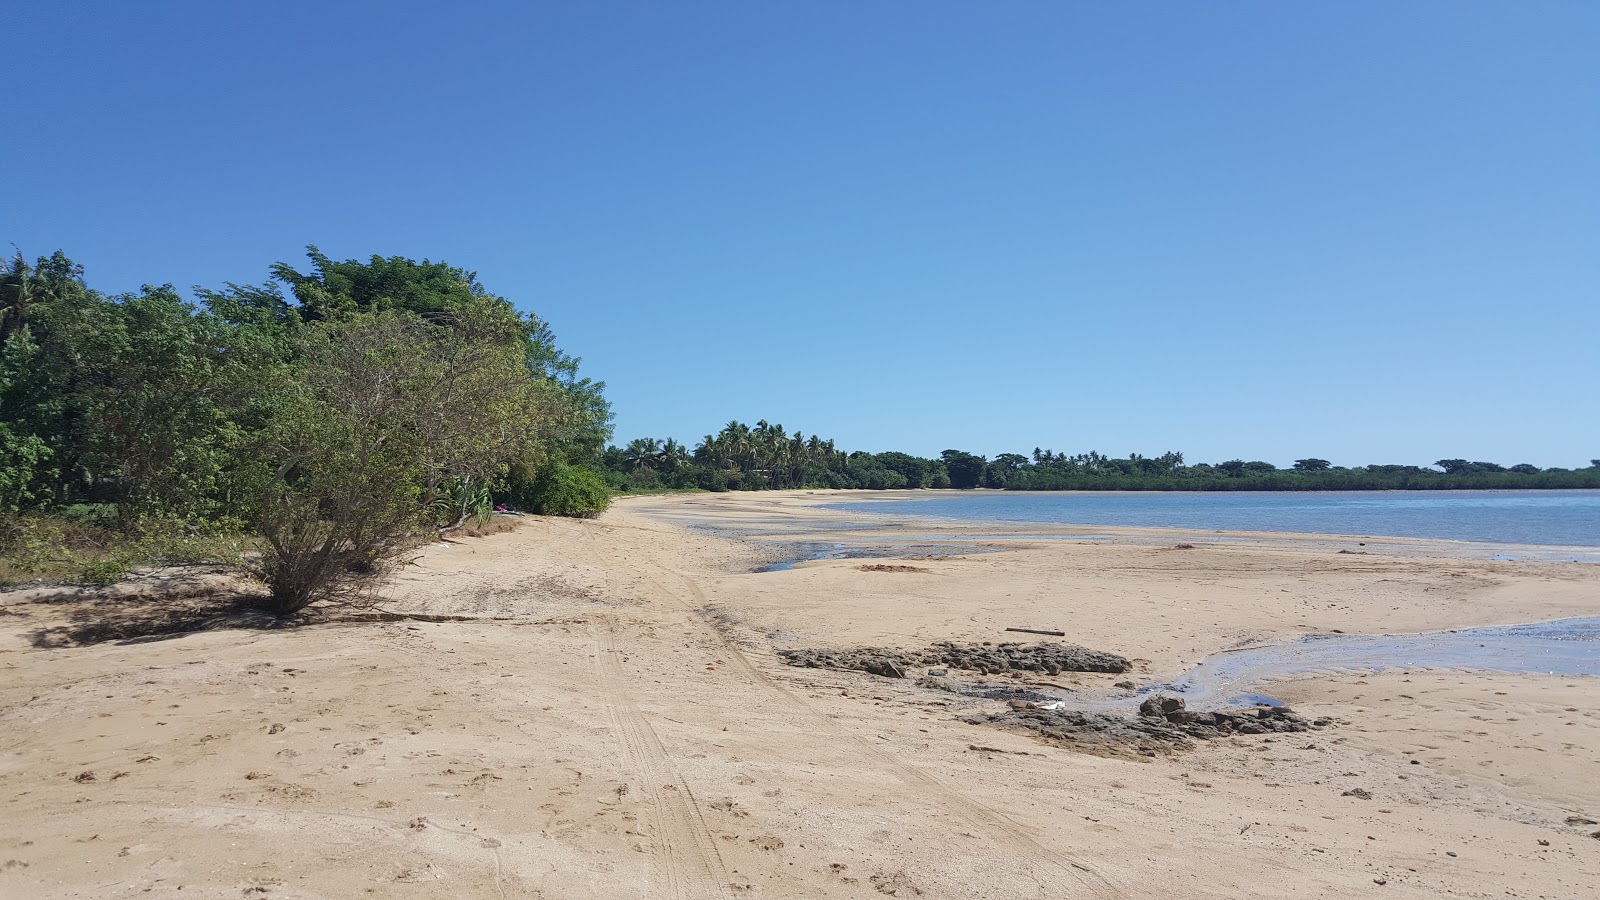 Photo of Saweni Beach with bright sand surface